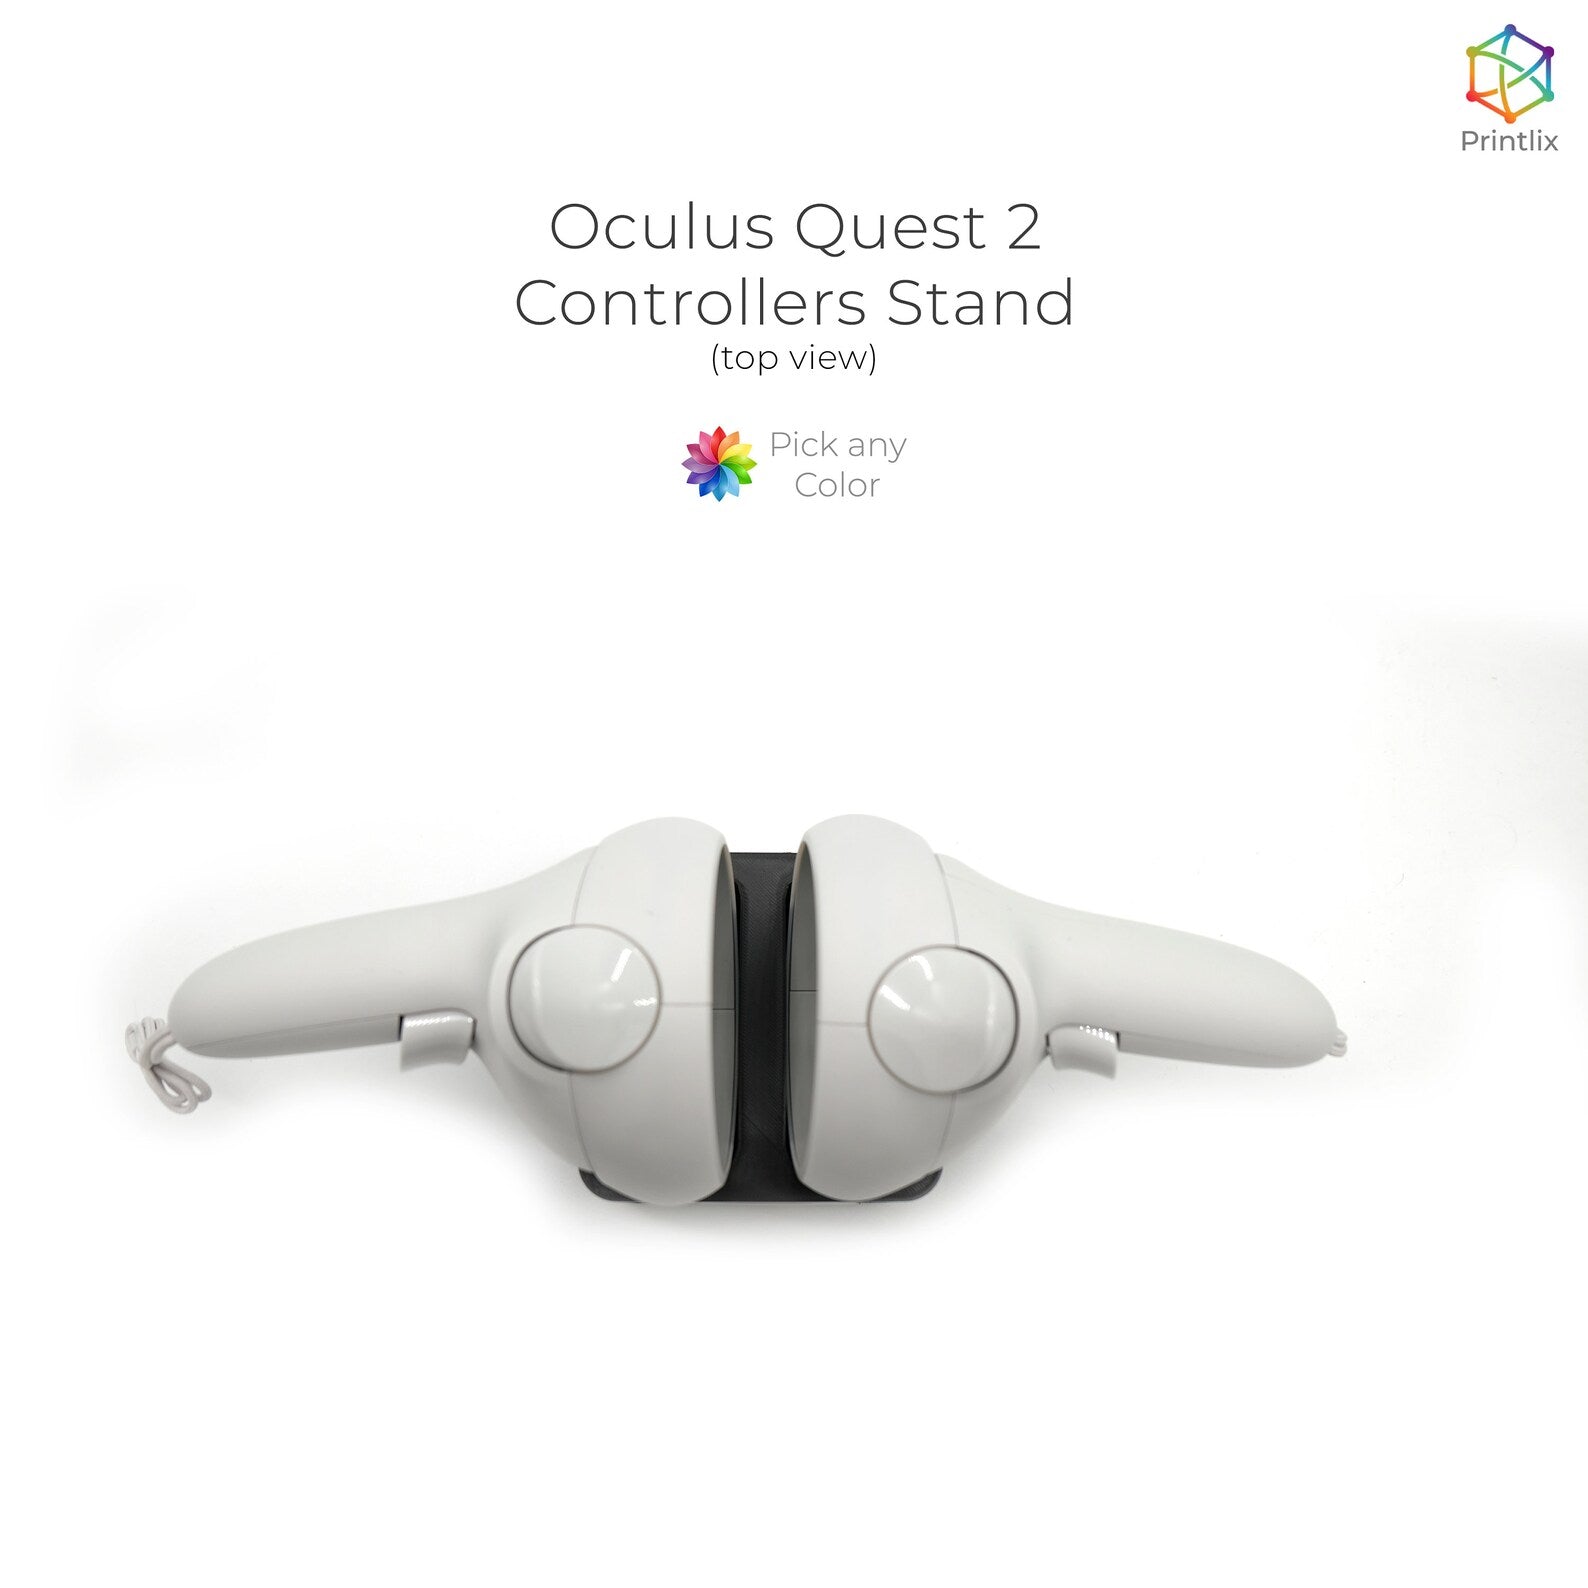 Oculus Quest 2 Controllers Stand